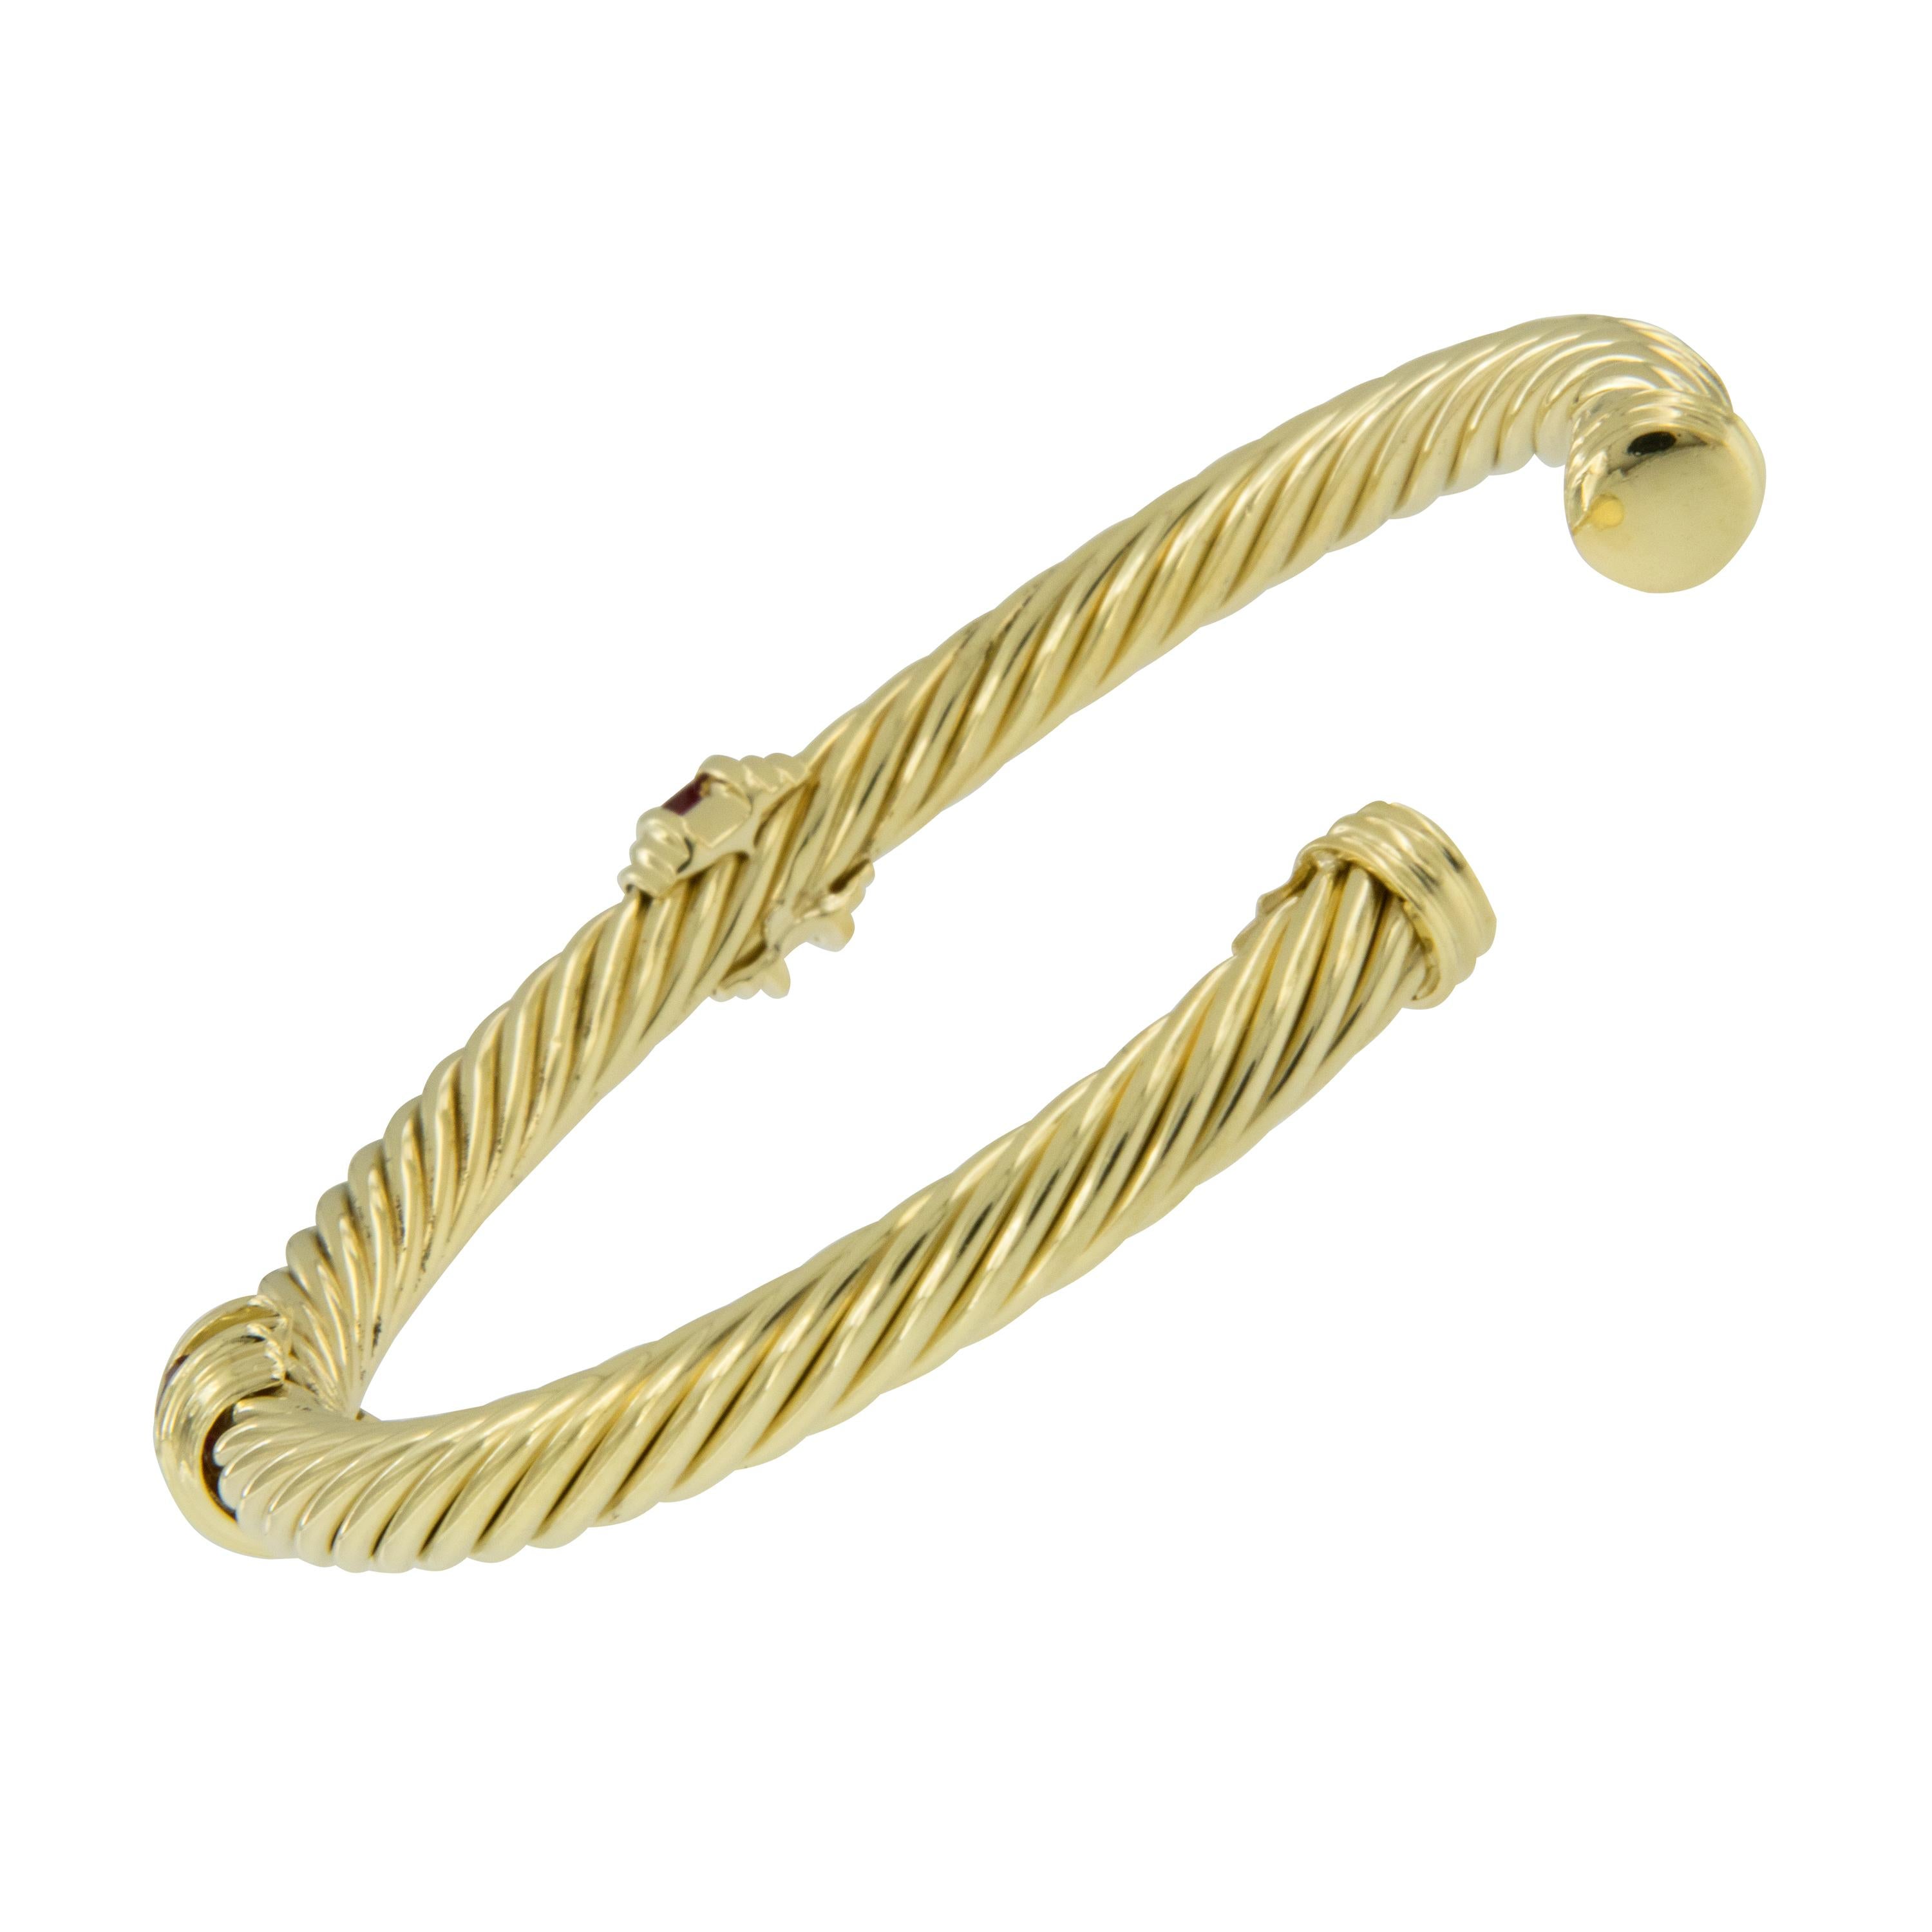 Timeless David Yurman design cable spira cuff bracelet with double square cut ruby stations. This bracelet looks fantastic on your wrist alone or stacked . Cuff style bangle is convenient for ease of on & off your wrist. Complimentary signature